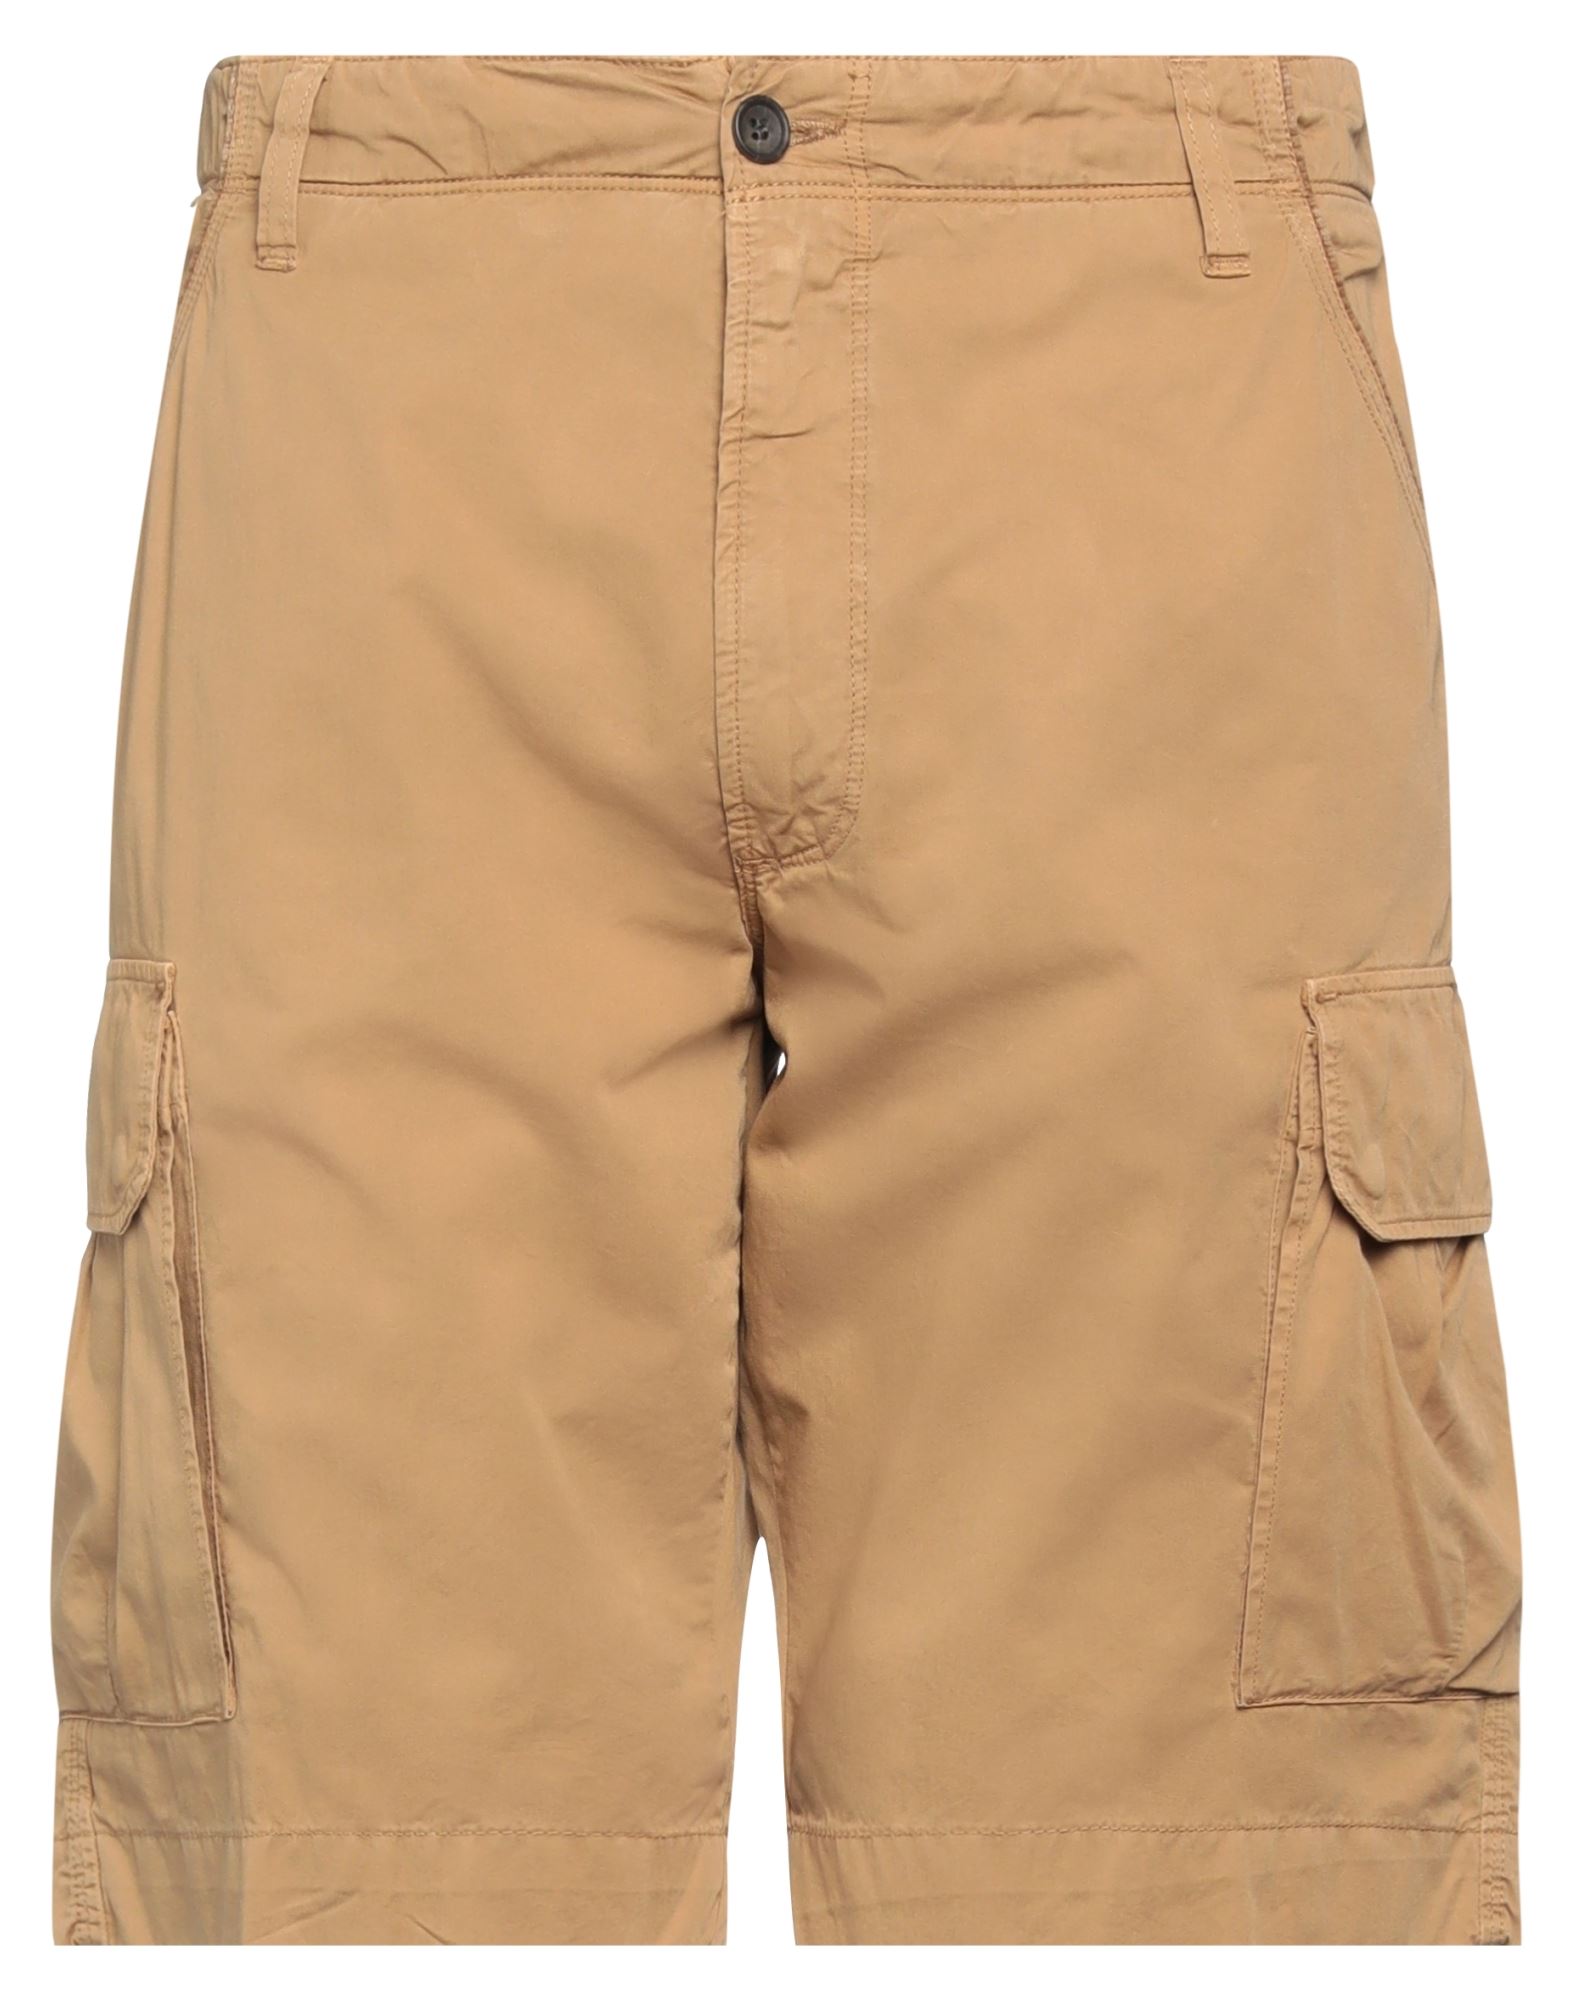 Perfection Man Shorts & Bermuda Shorts Camel Size 36 Cotton In Beige